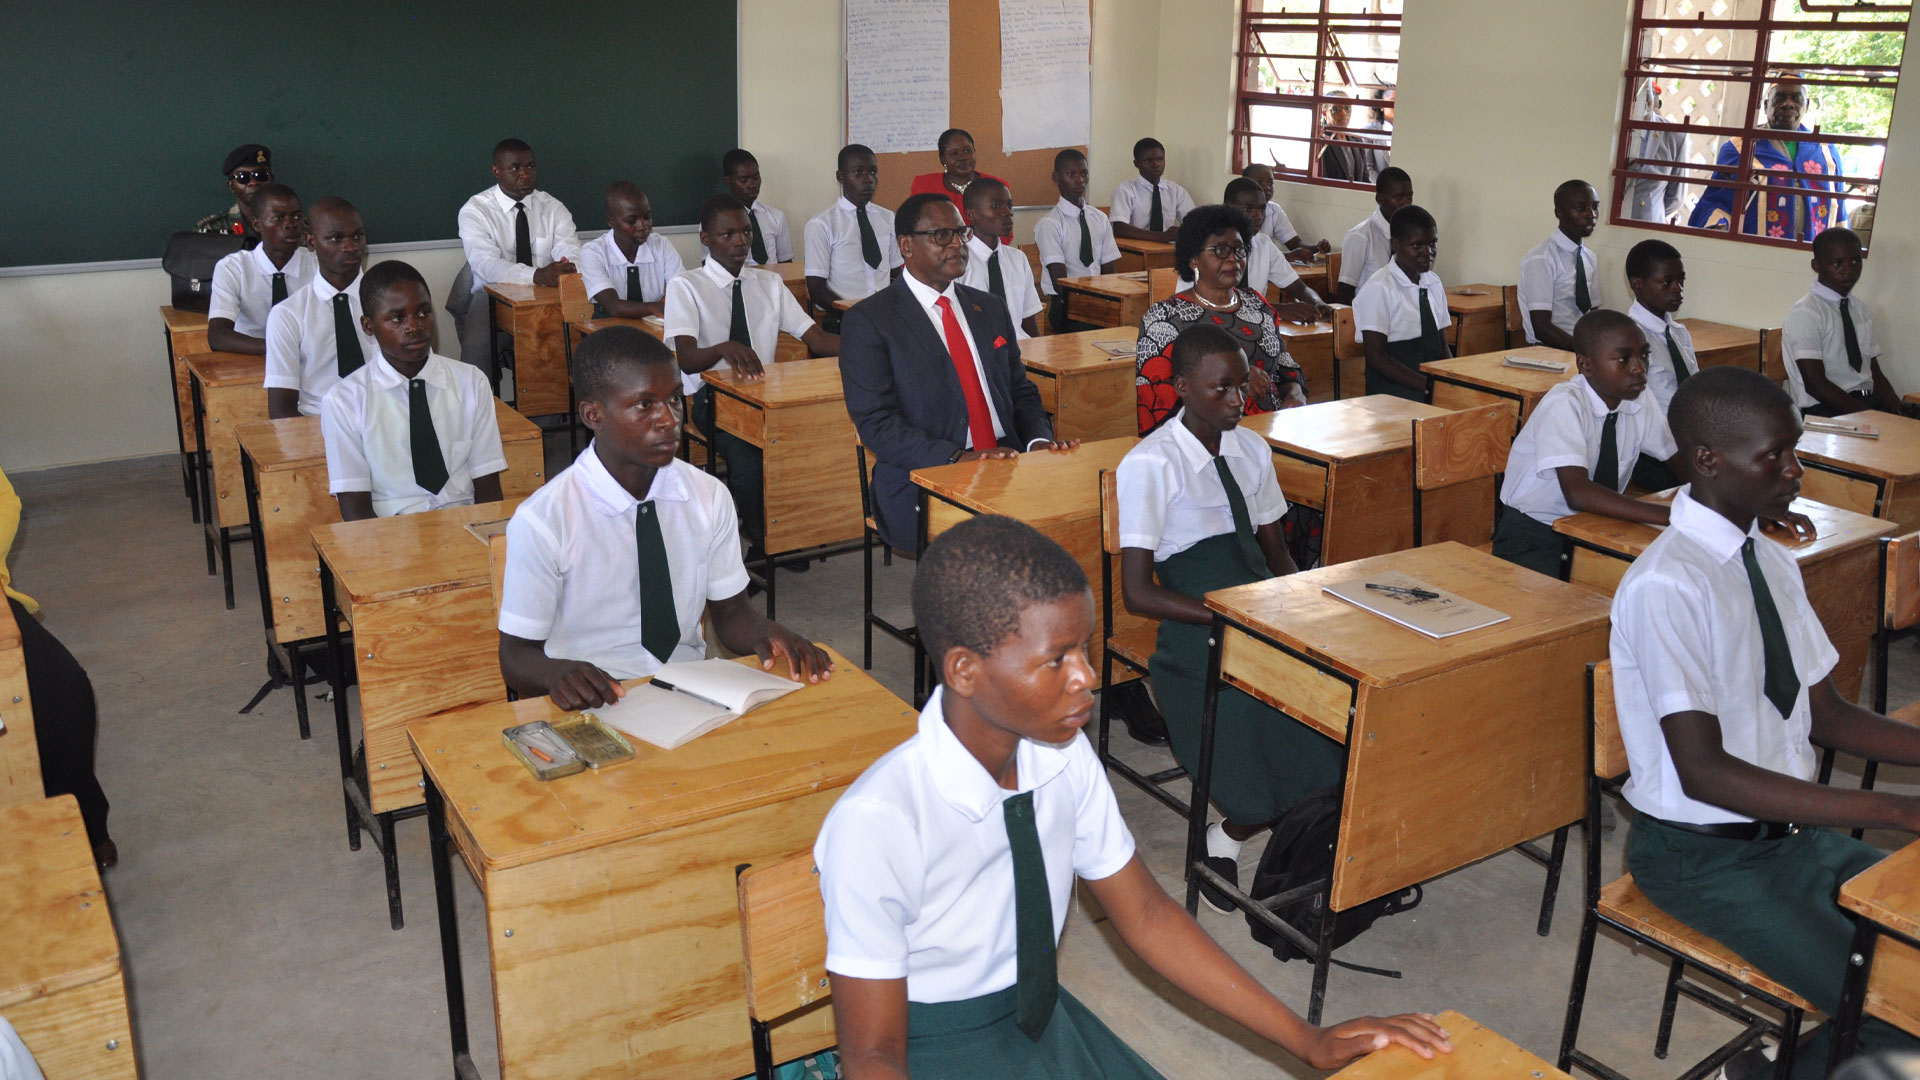 Malawi President and First Lady sit in a SEED Classroom in Mkanga, Salima among other students at their desks